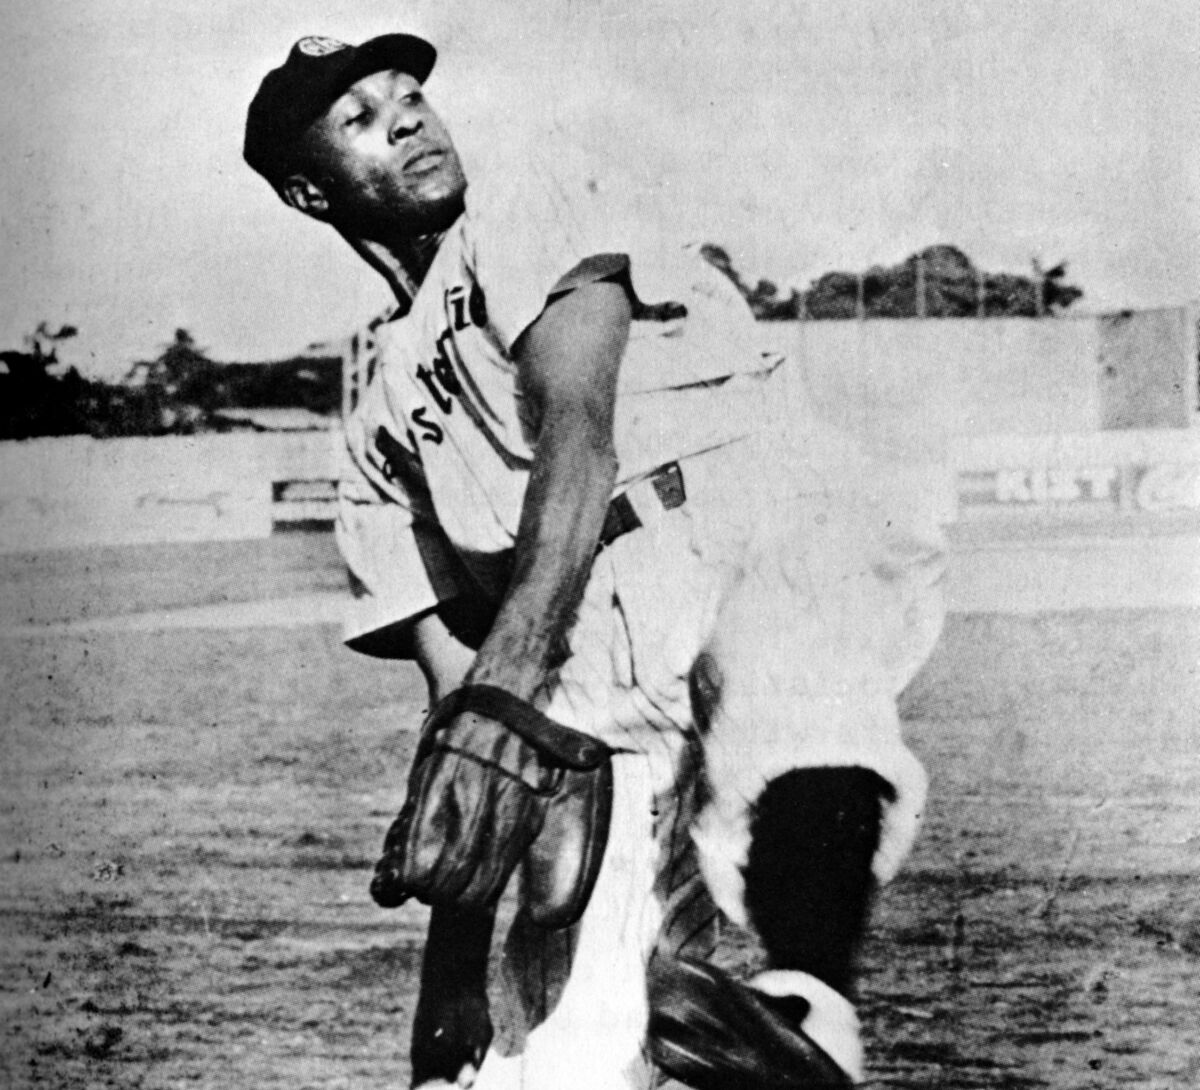 Chet Brewer loosens up before a game in 1937.